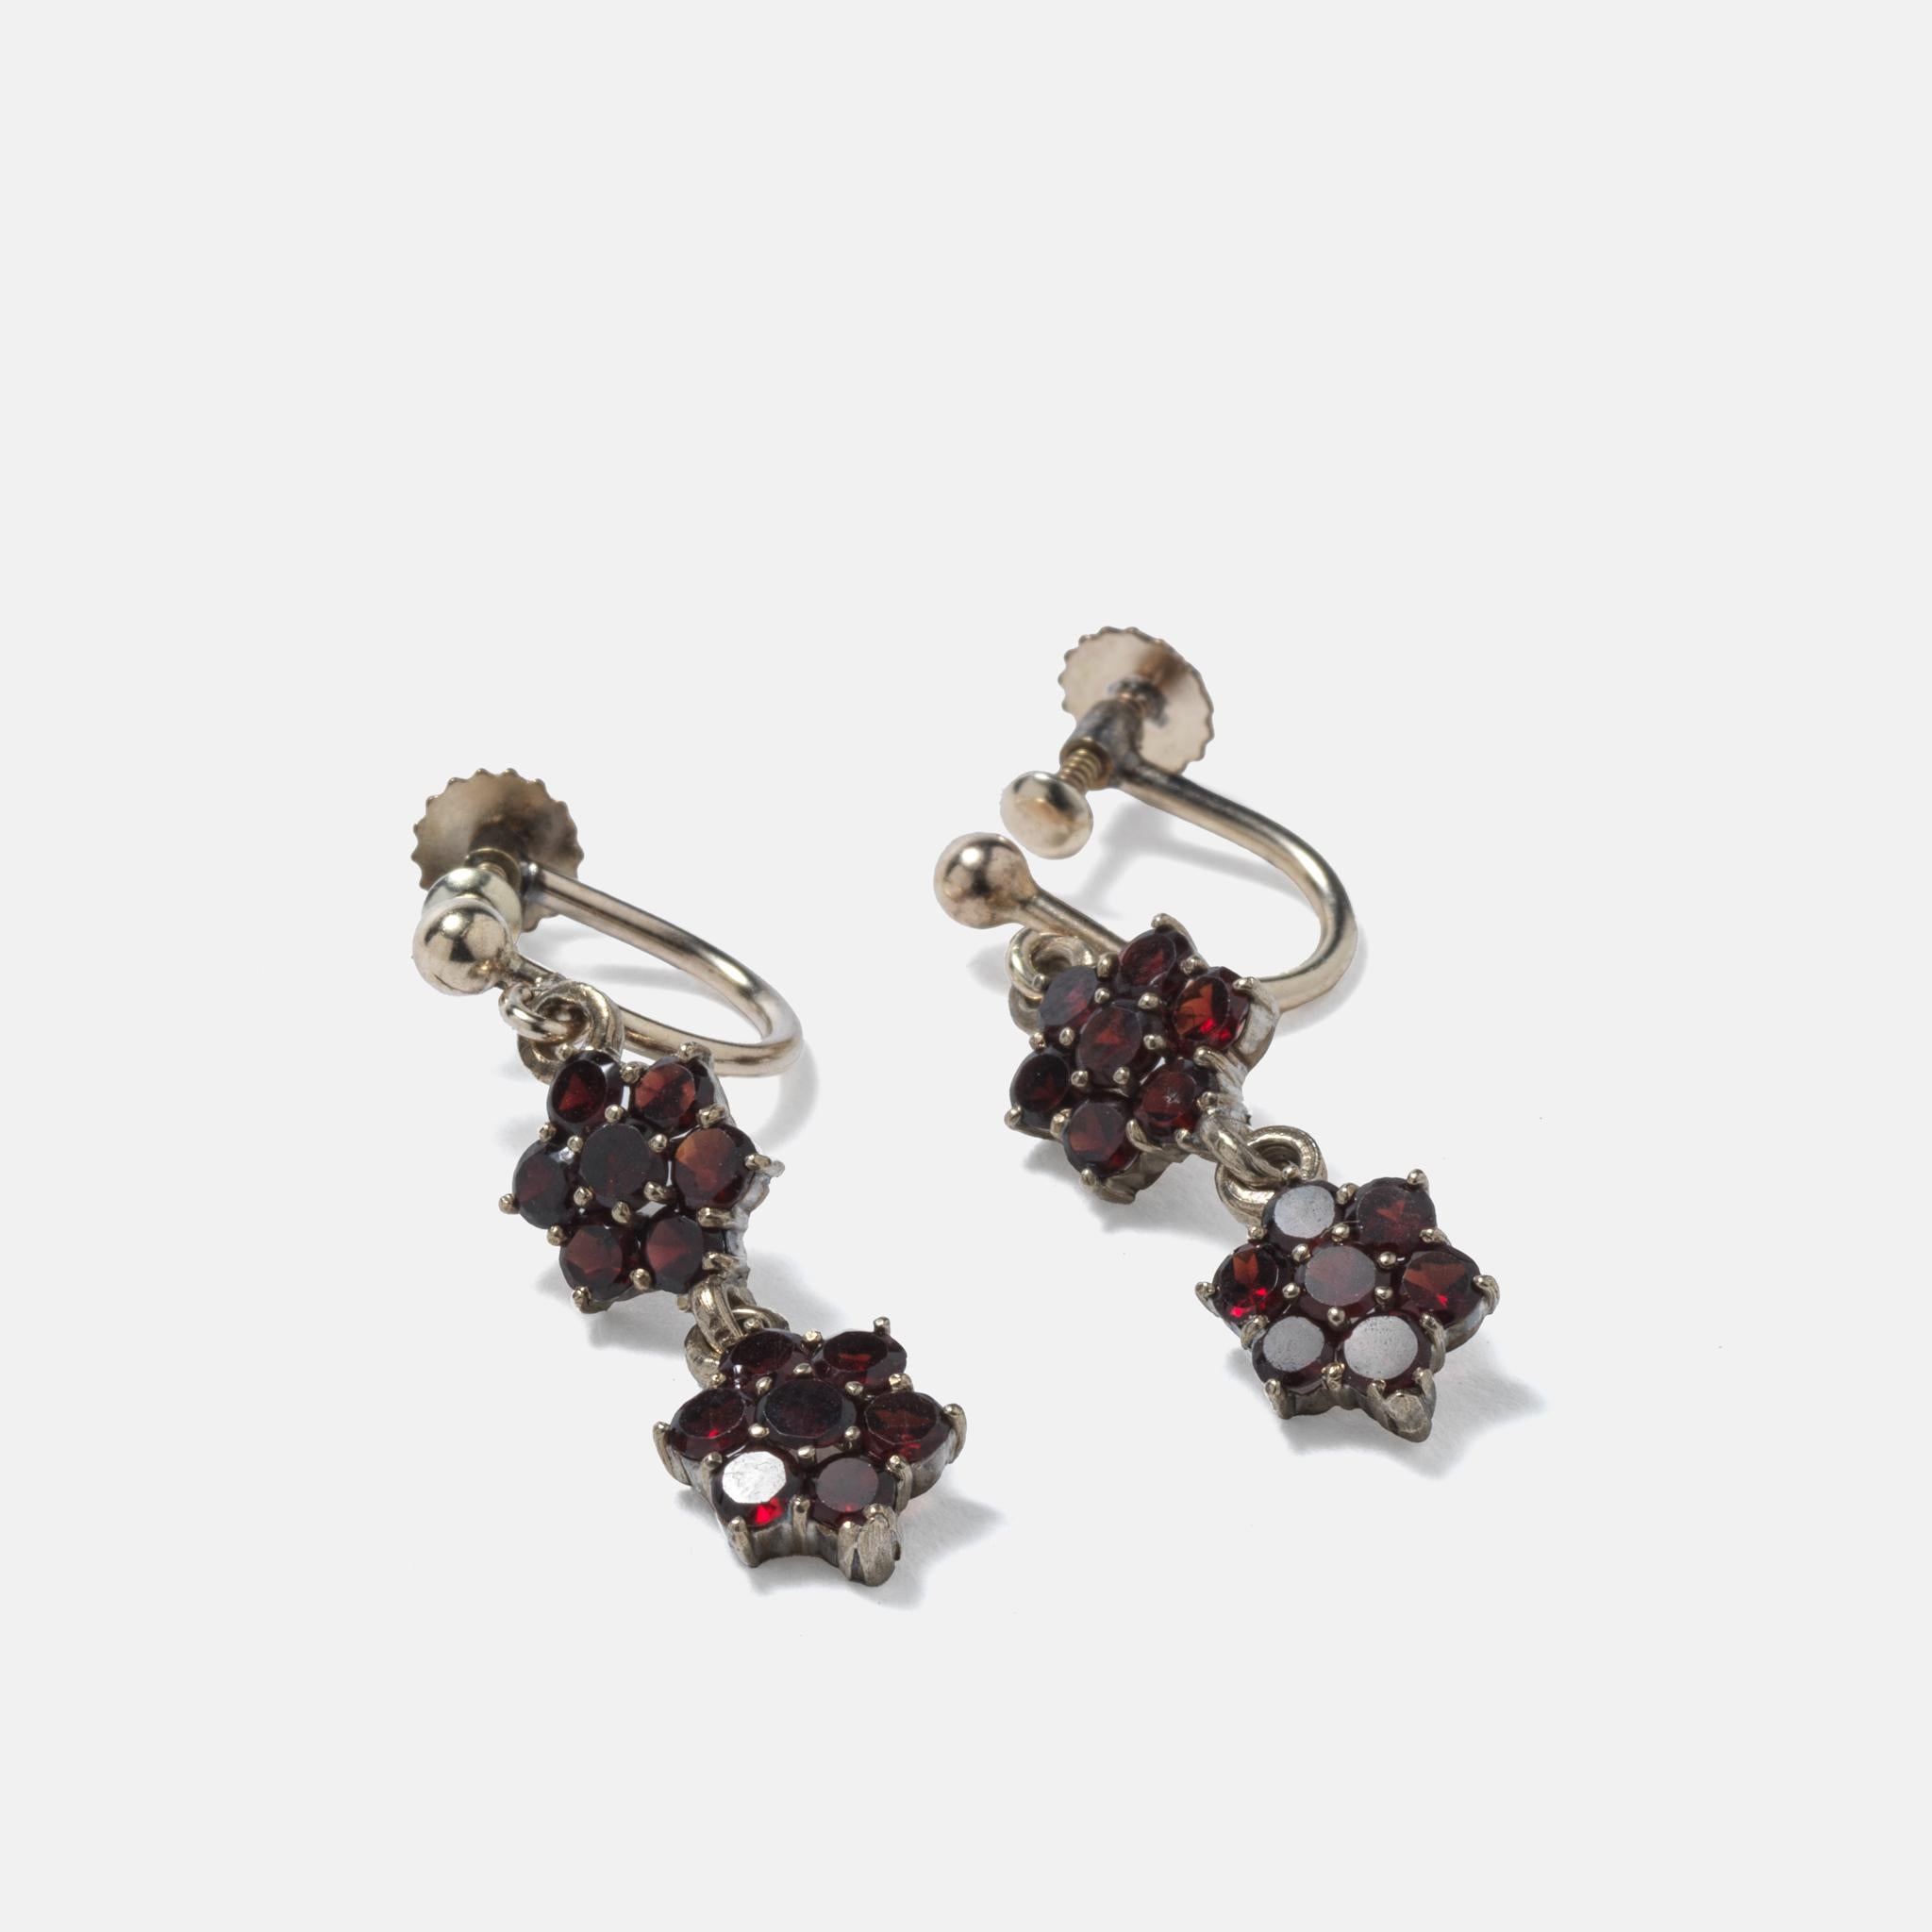 Mixed Cut Antique pair of earrings. Silver and garnets. For Sale